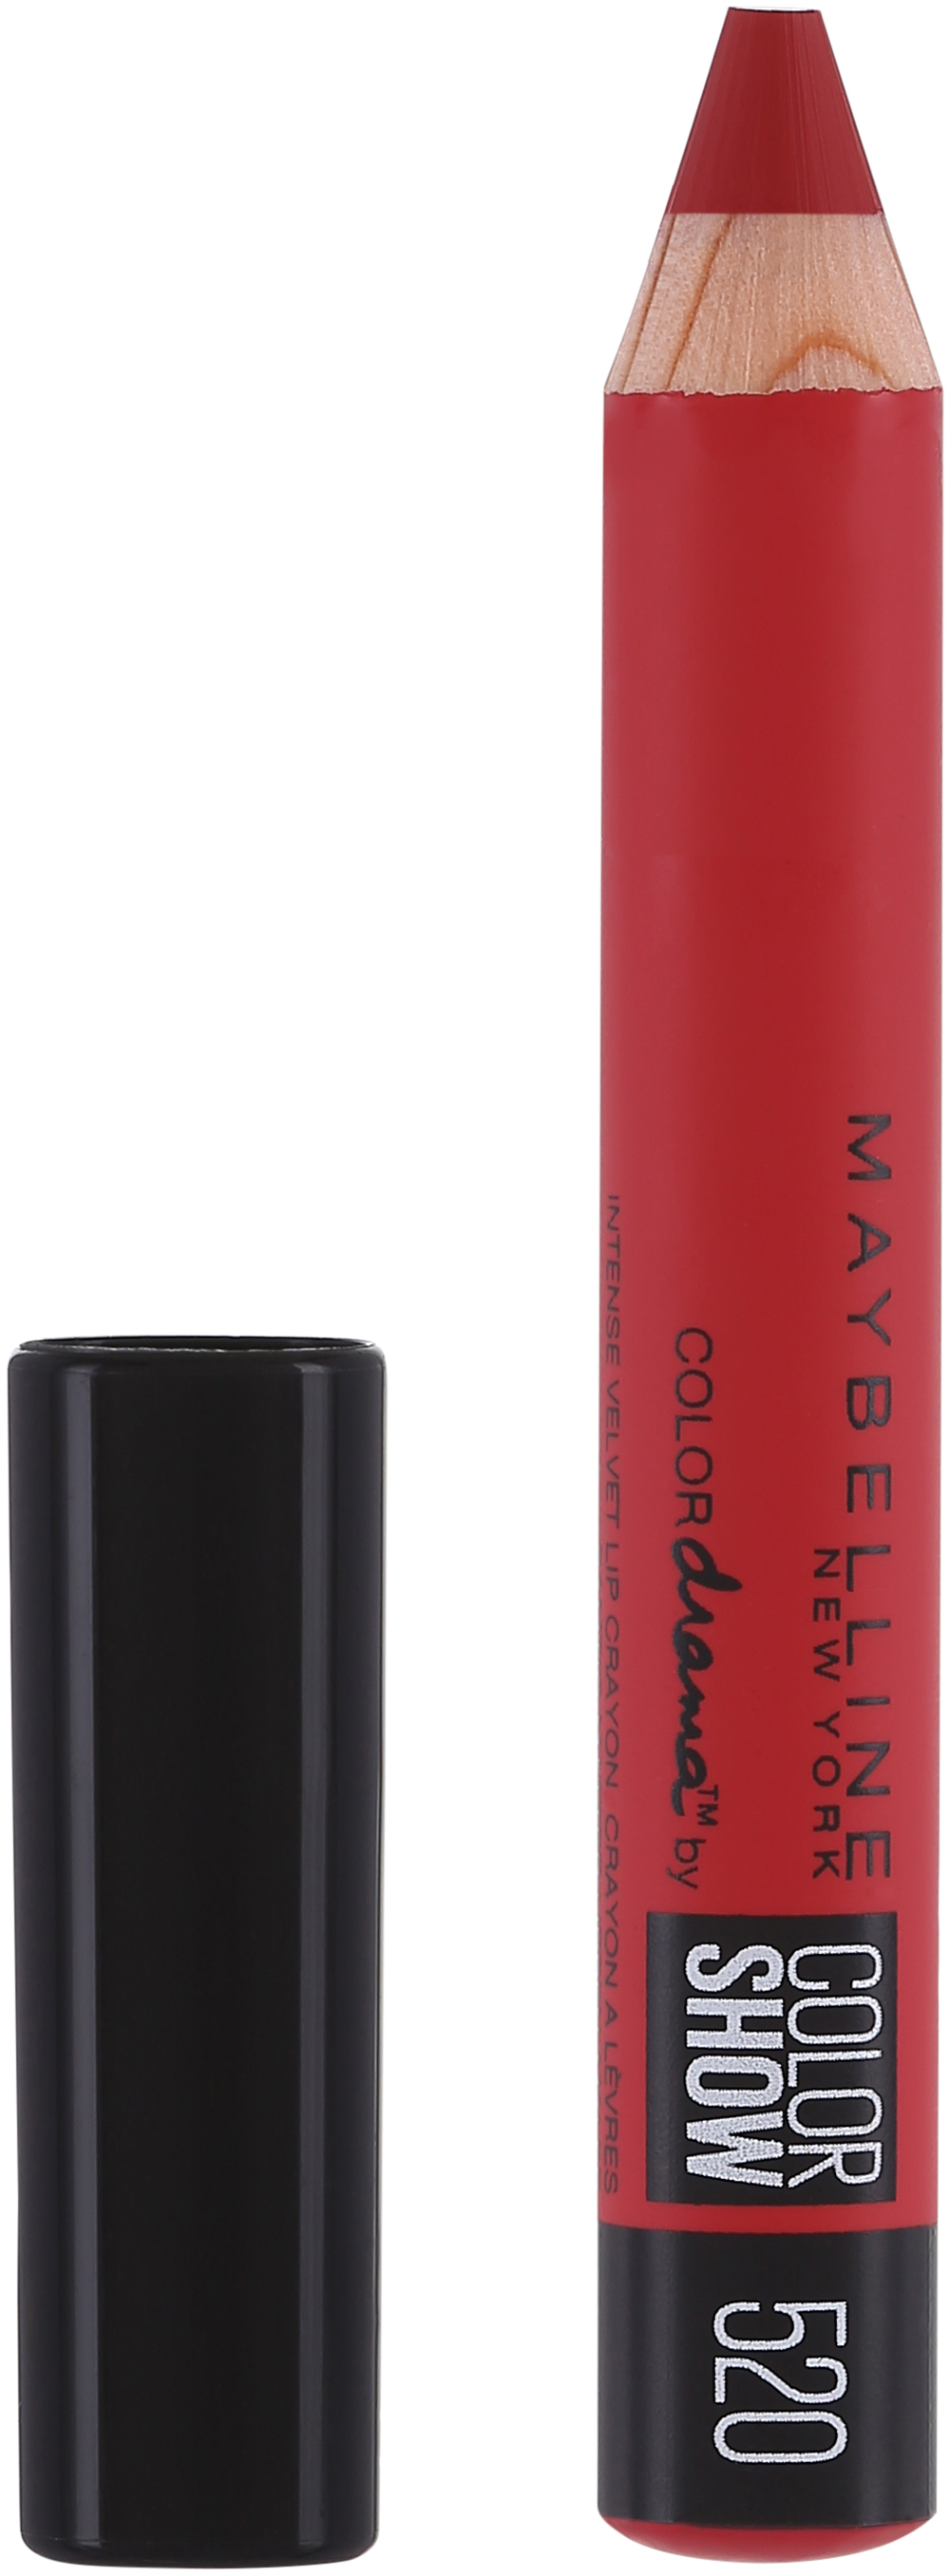 Maybelline Color Drama Lips 520 Light It Up